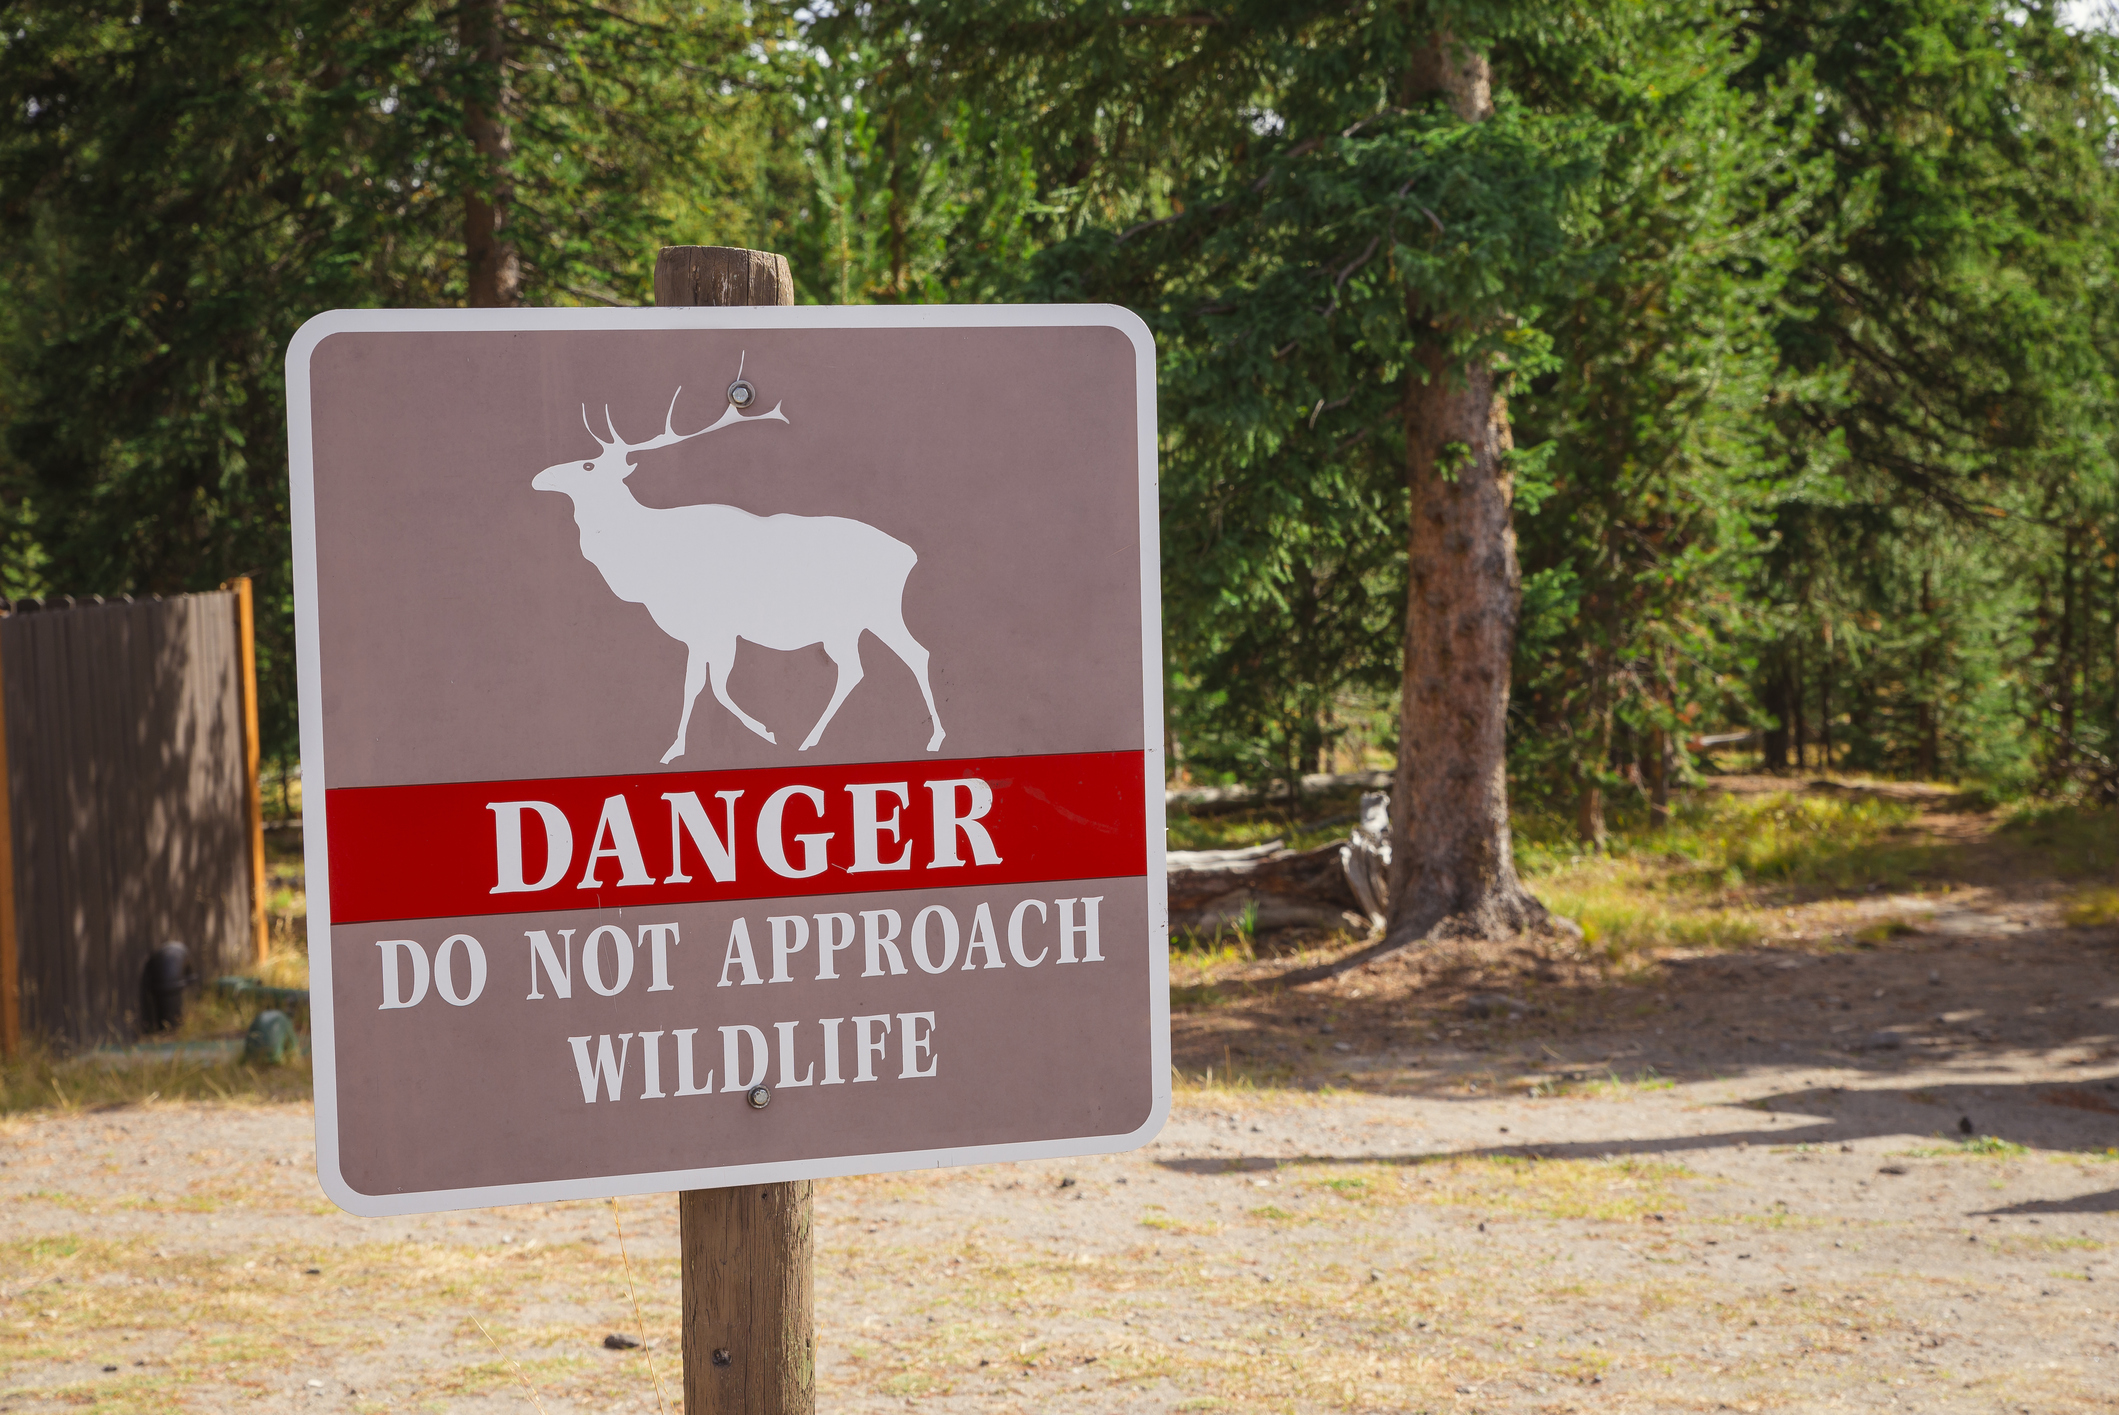 A Danger sign in front of trees in Yellowstone National Park warns visitors to not approach wildlife.